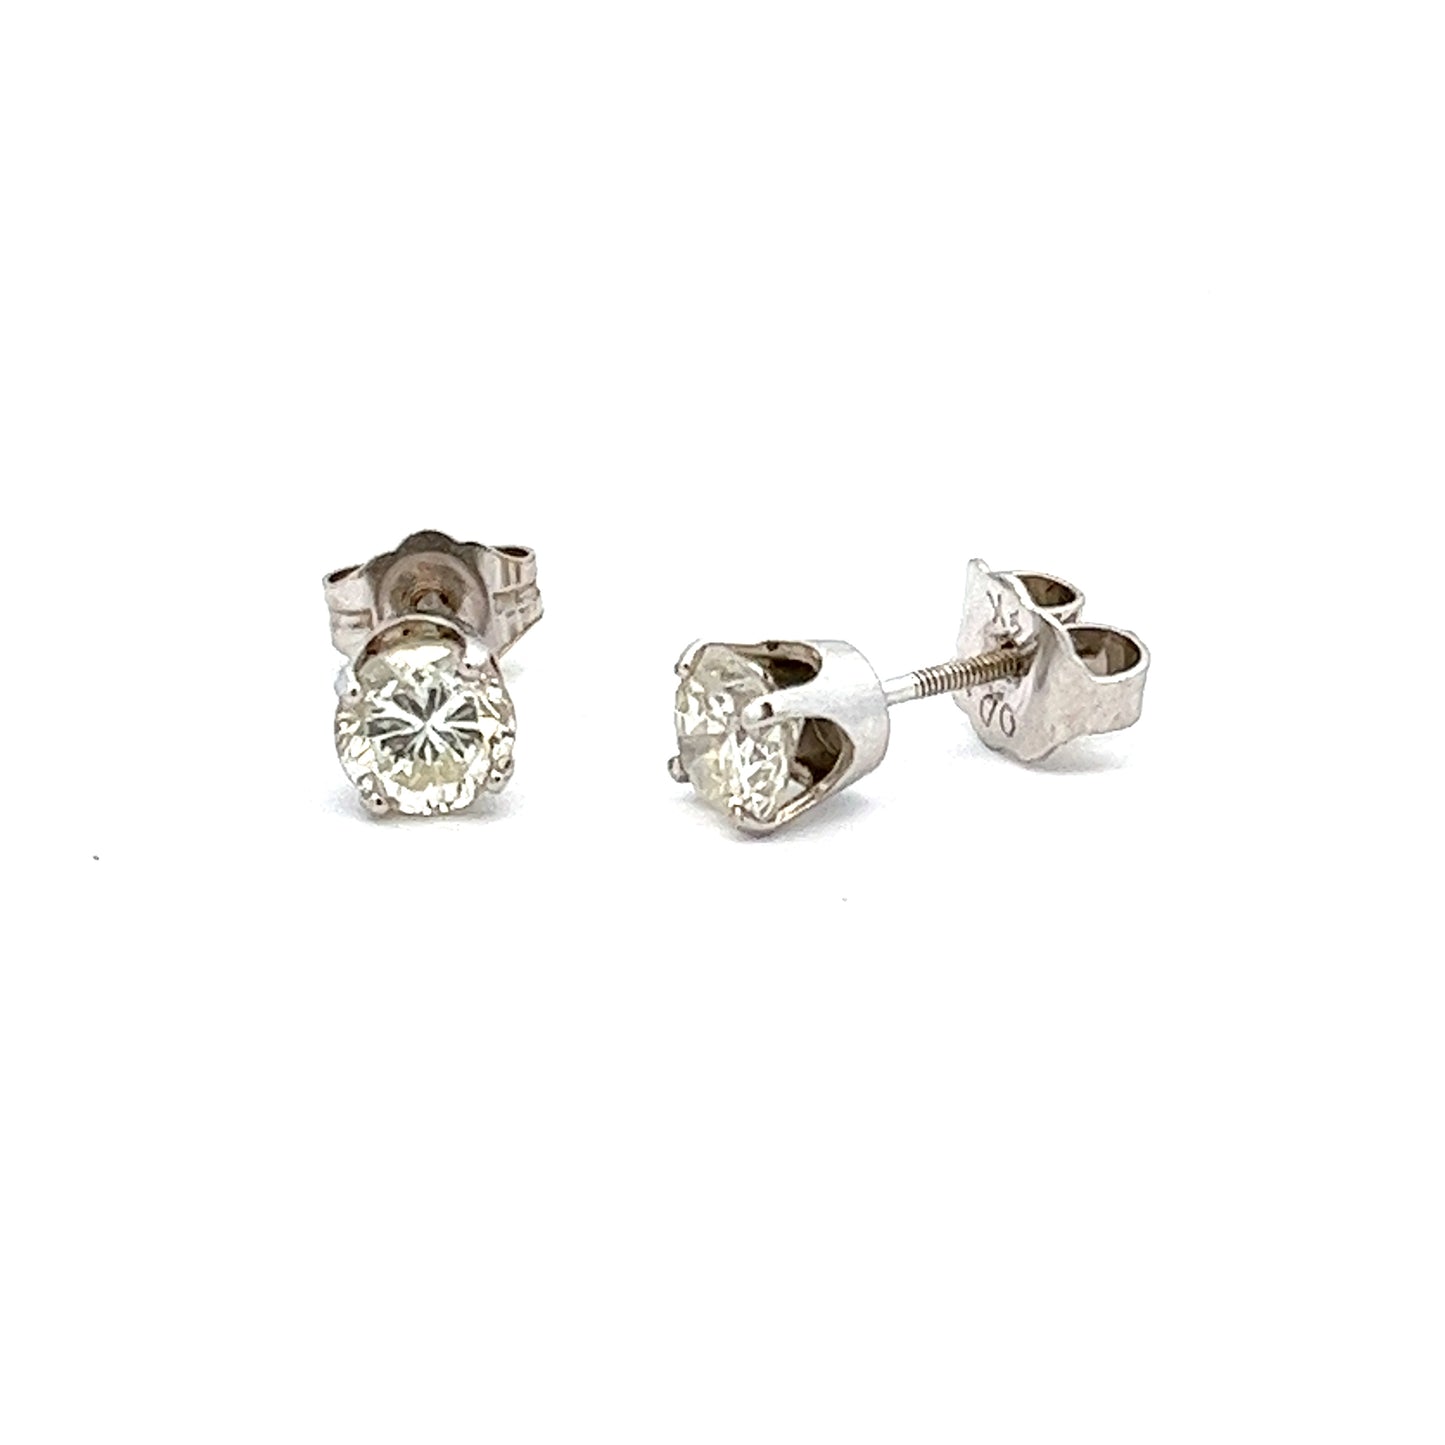 3/4ct total weight round diamond stud earrings